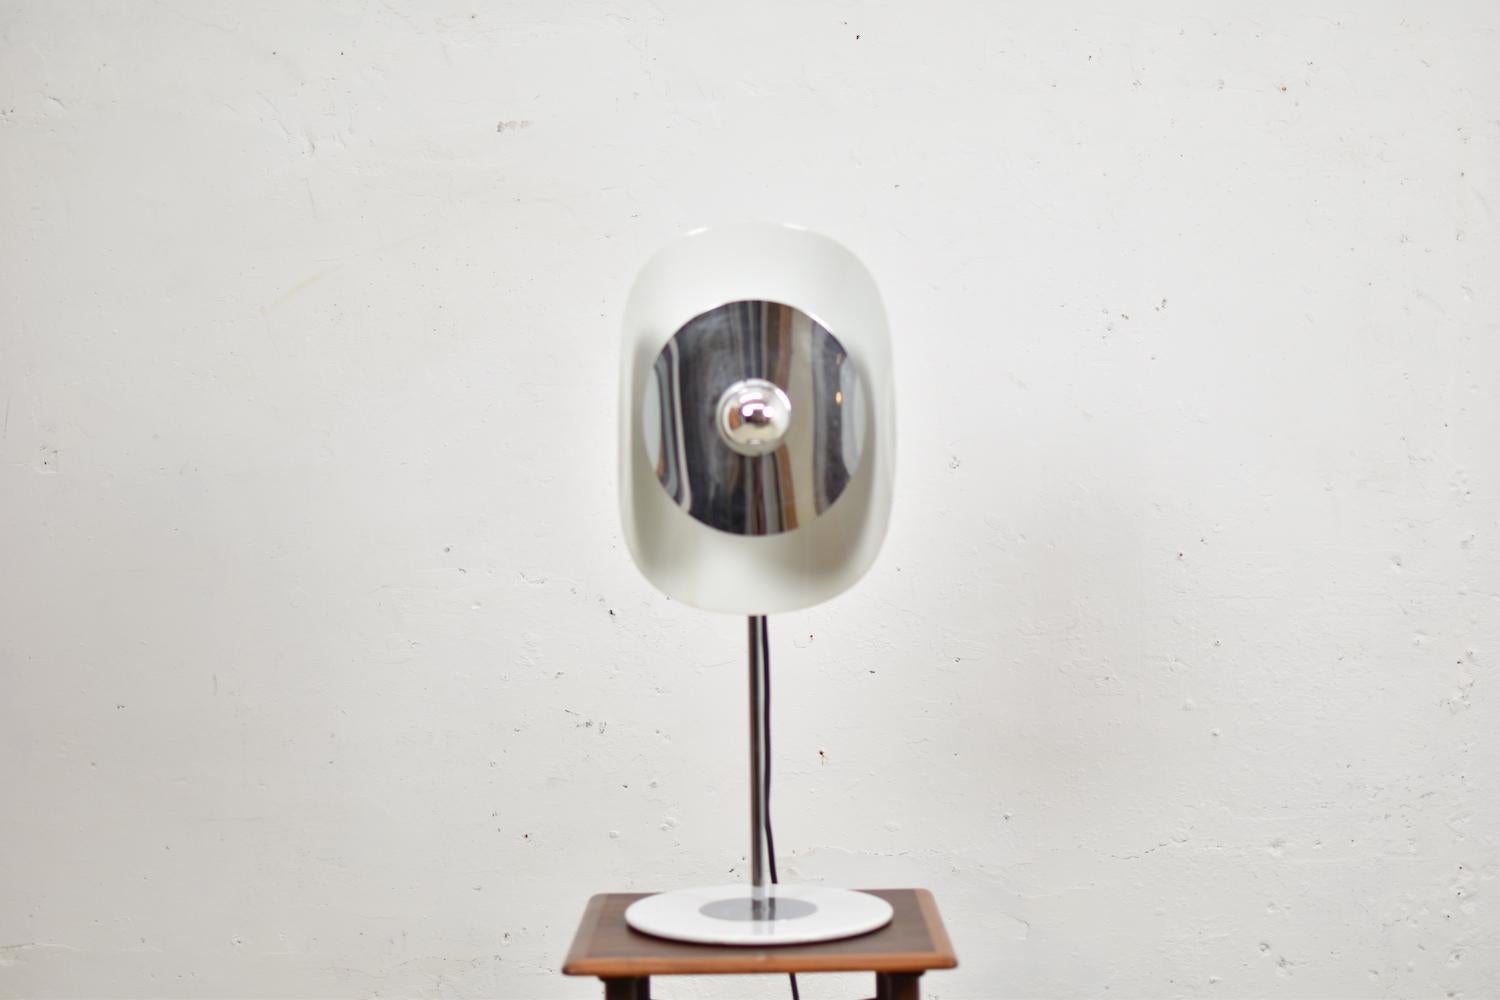 Rare table lamp by Brevetatto, Italy, 1970s. This Modernist desk lamp is made out of chromed metal and white lacquered aluminium. Adjustable in height. Labeled.